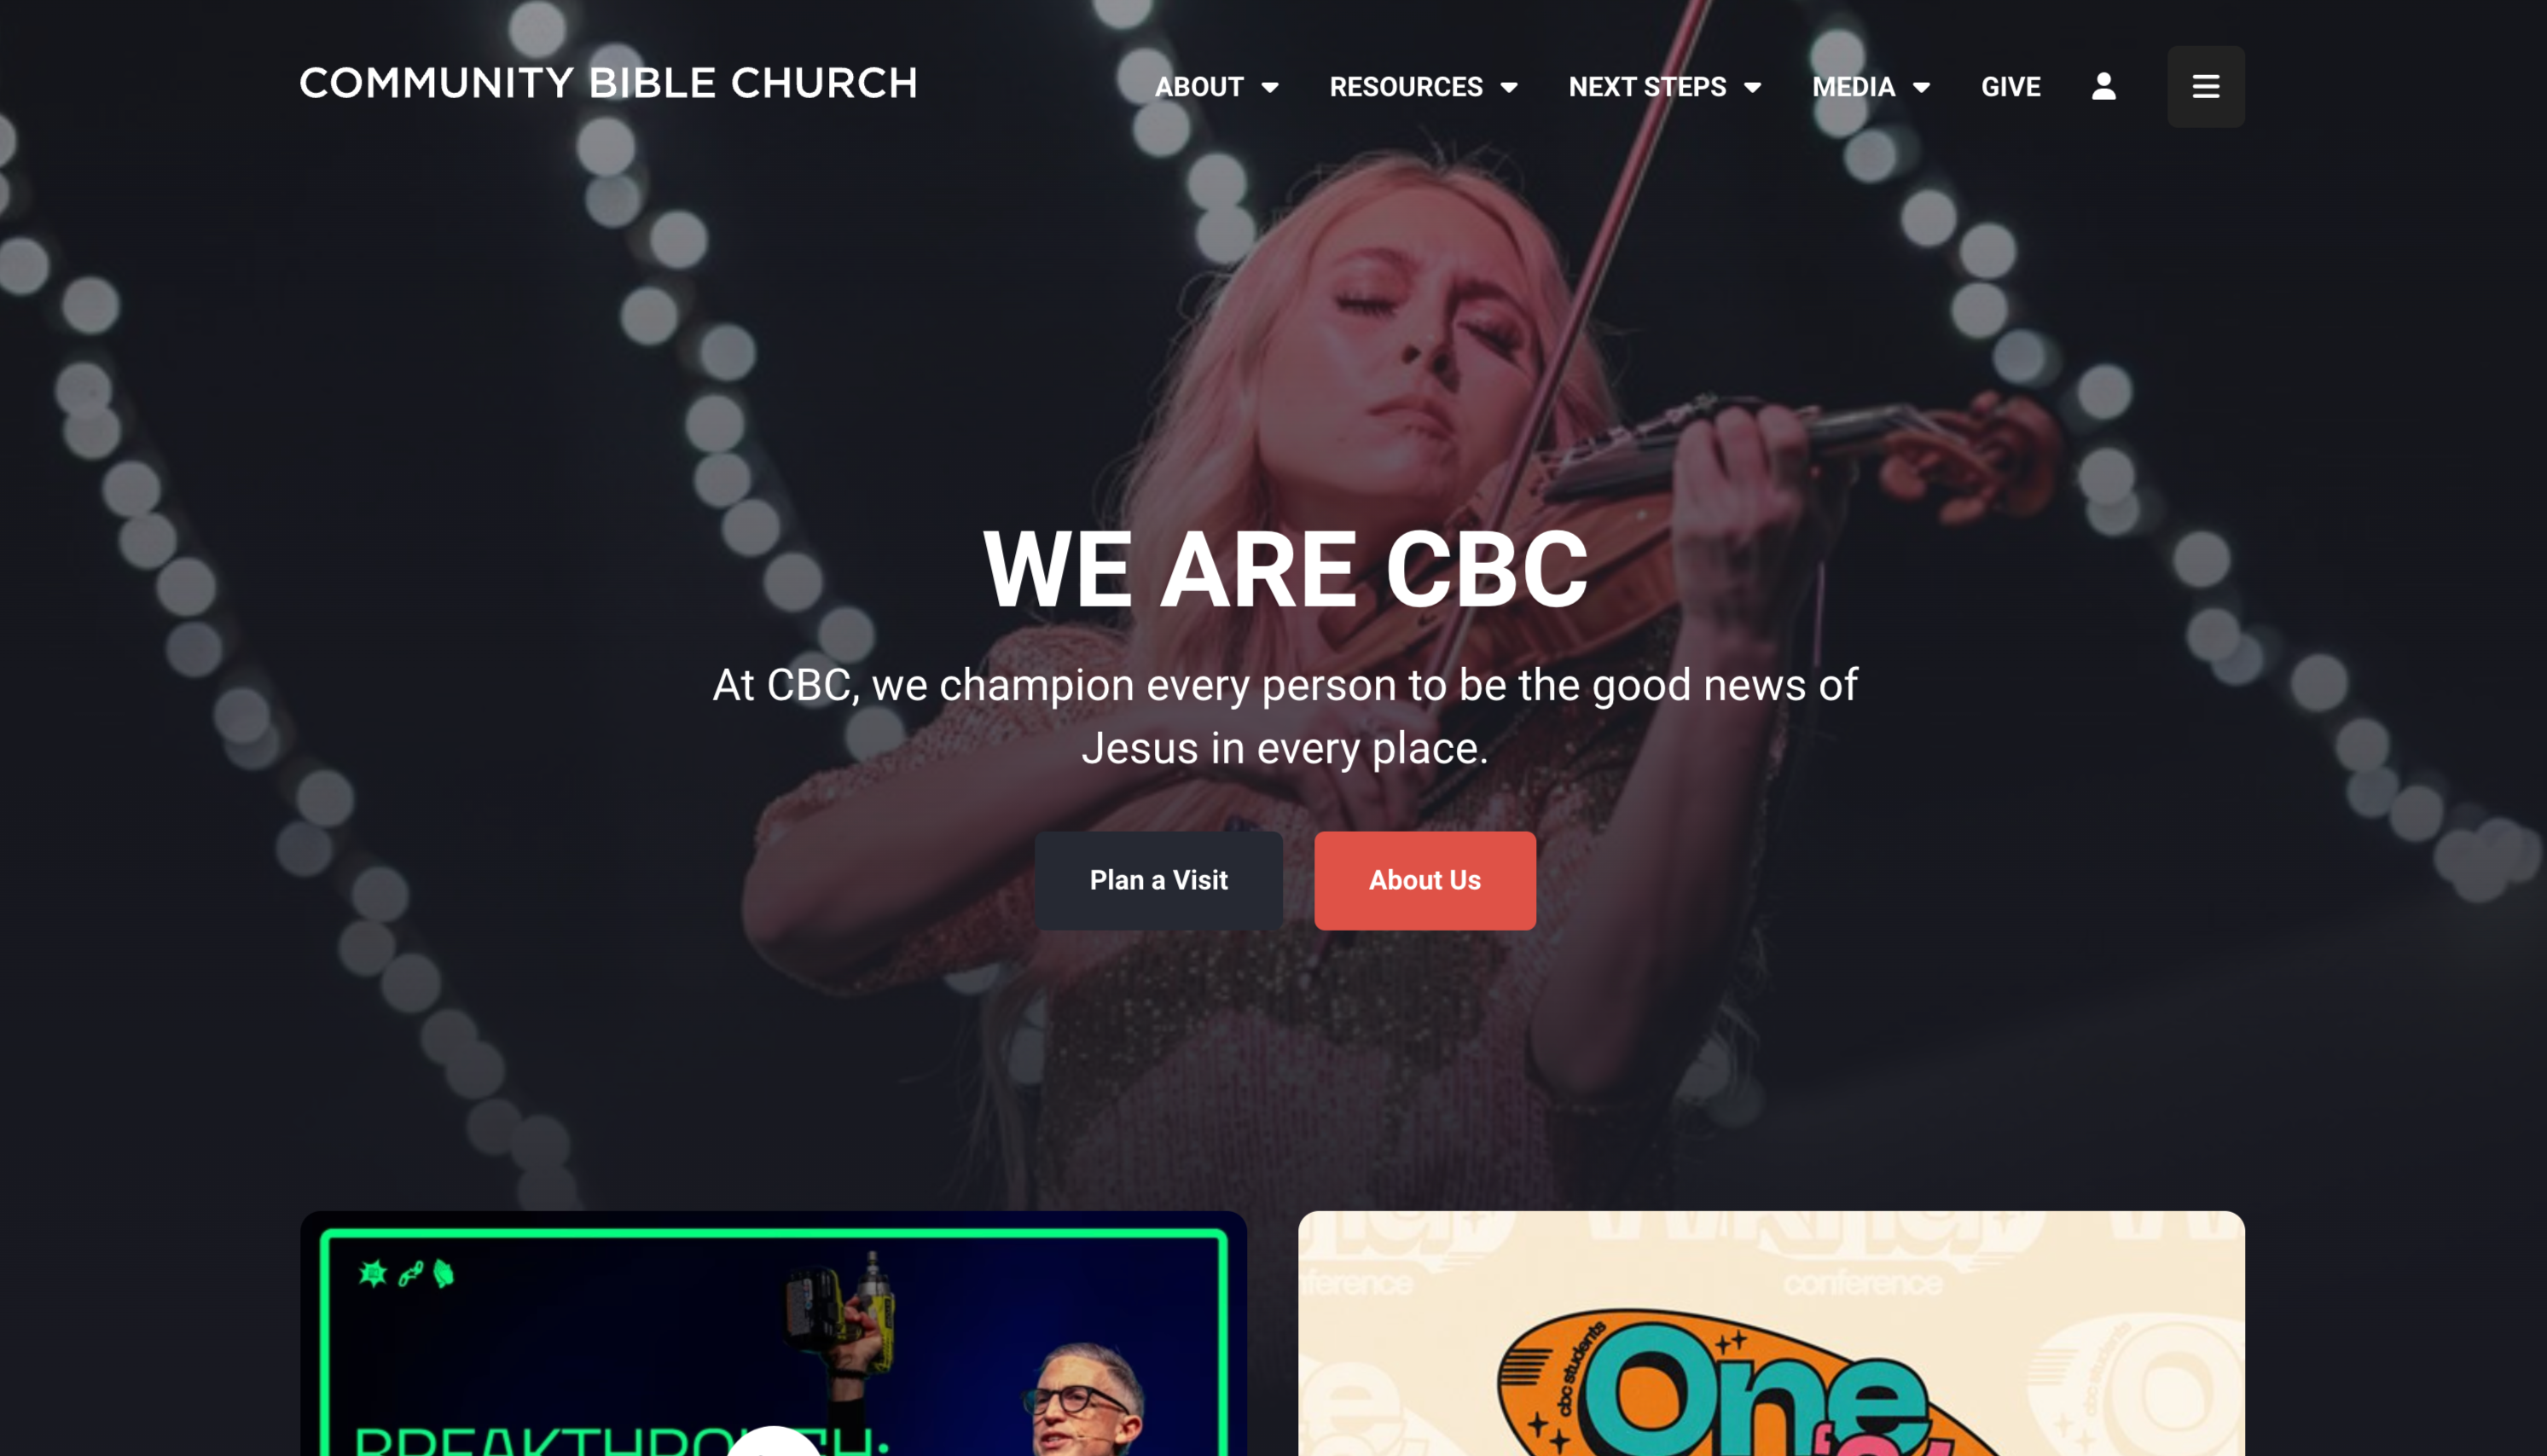 Website image from Community Bible Church located in San Antonio, TX.